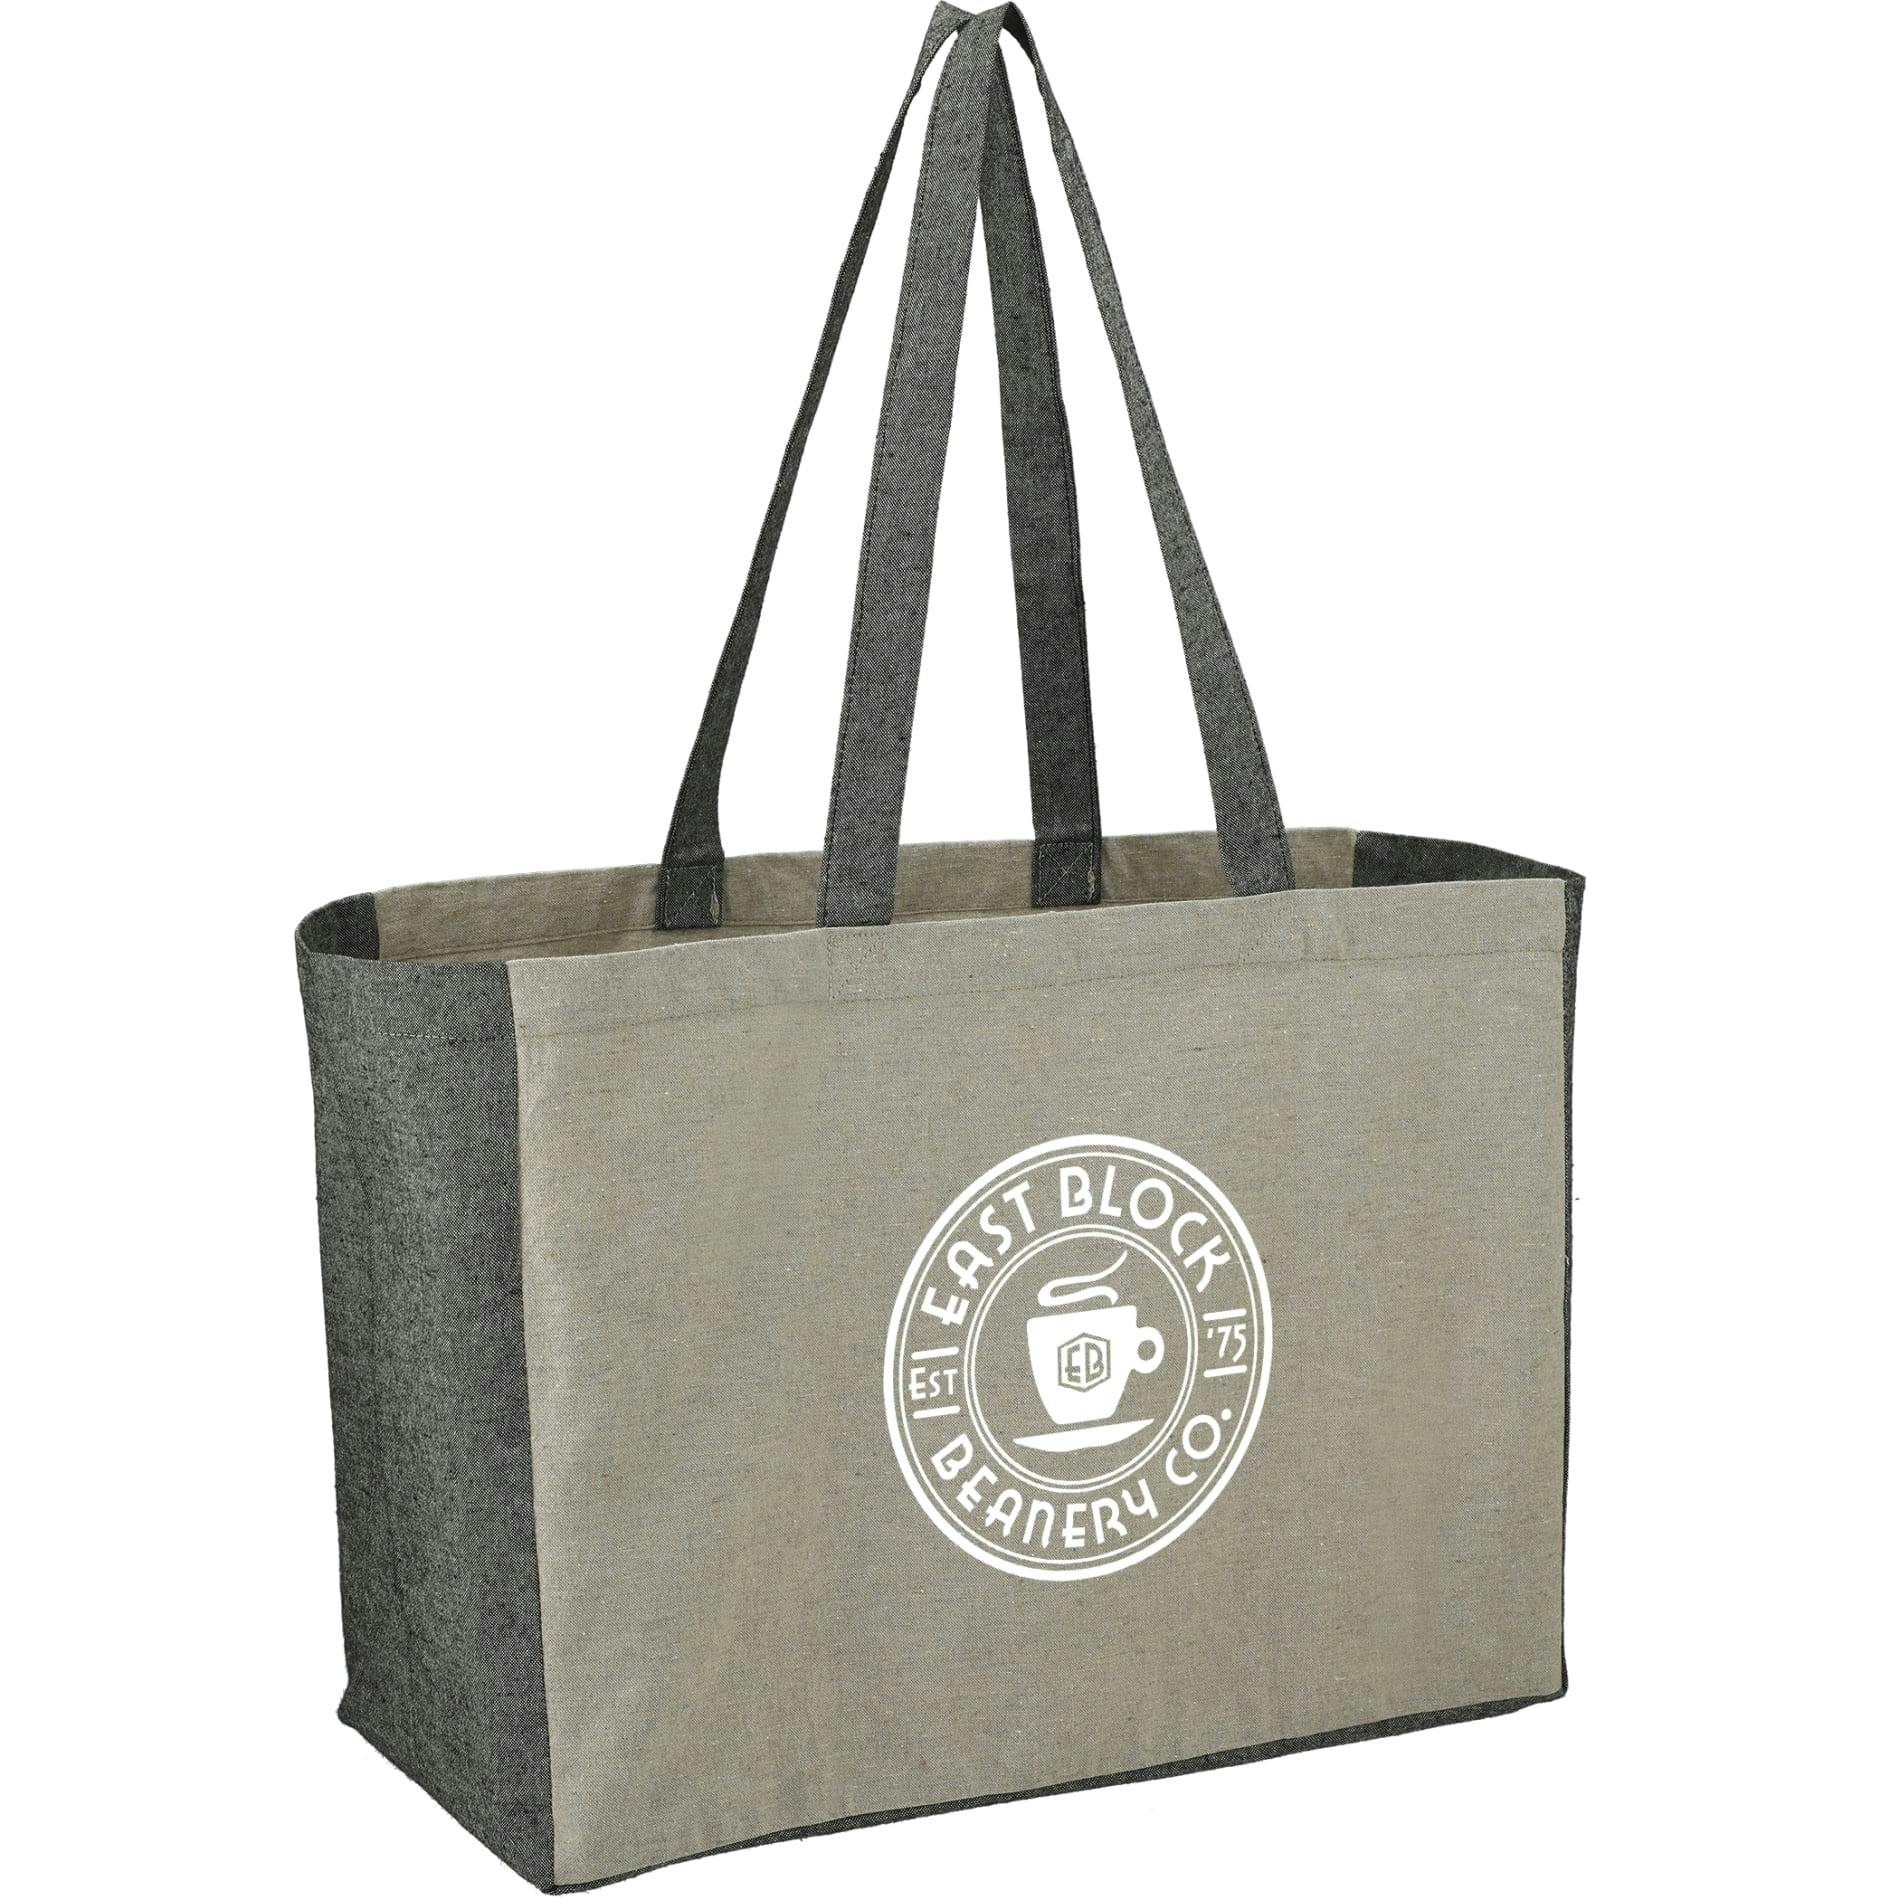 Recycled Cotton Contrast Side Shopper Tote - additional Image 1